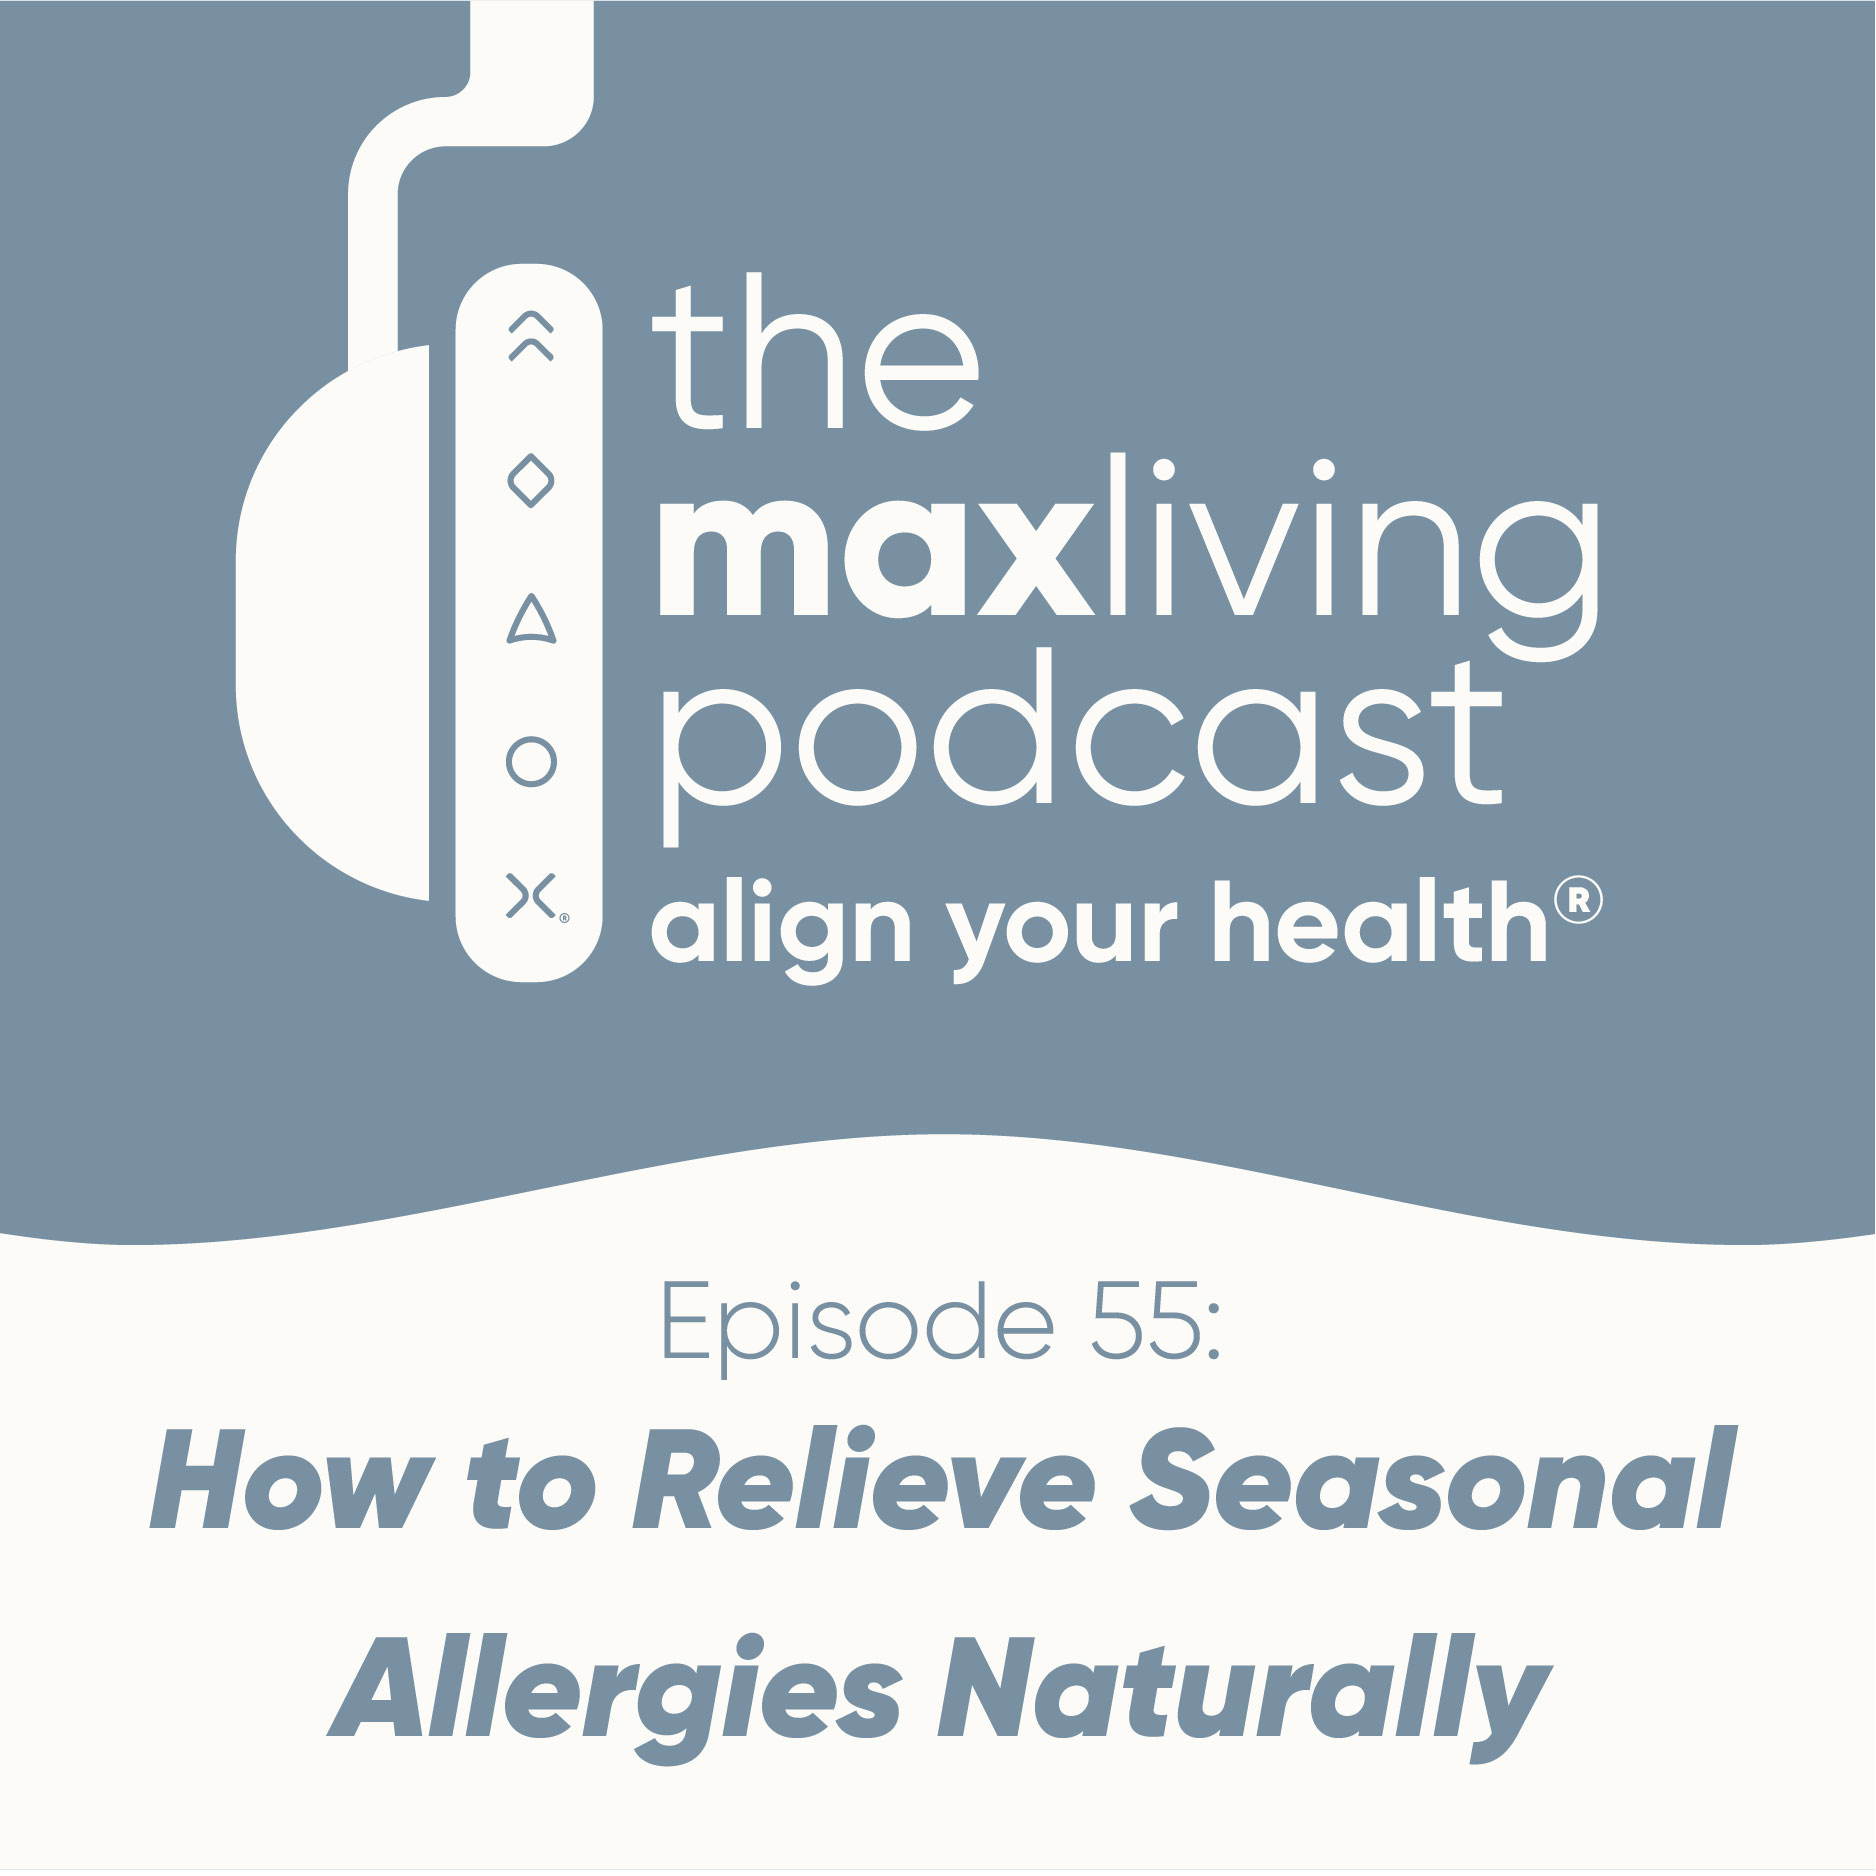 How to Relieve Seasonal Allergies Naturally